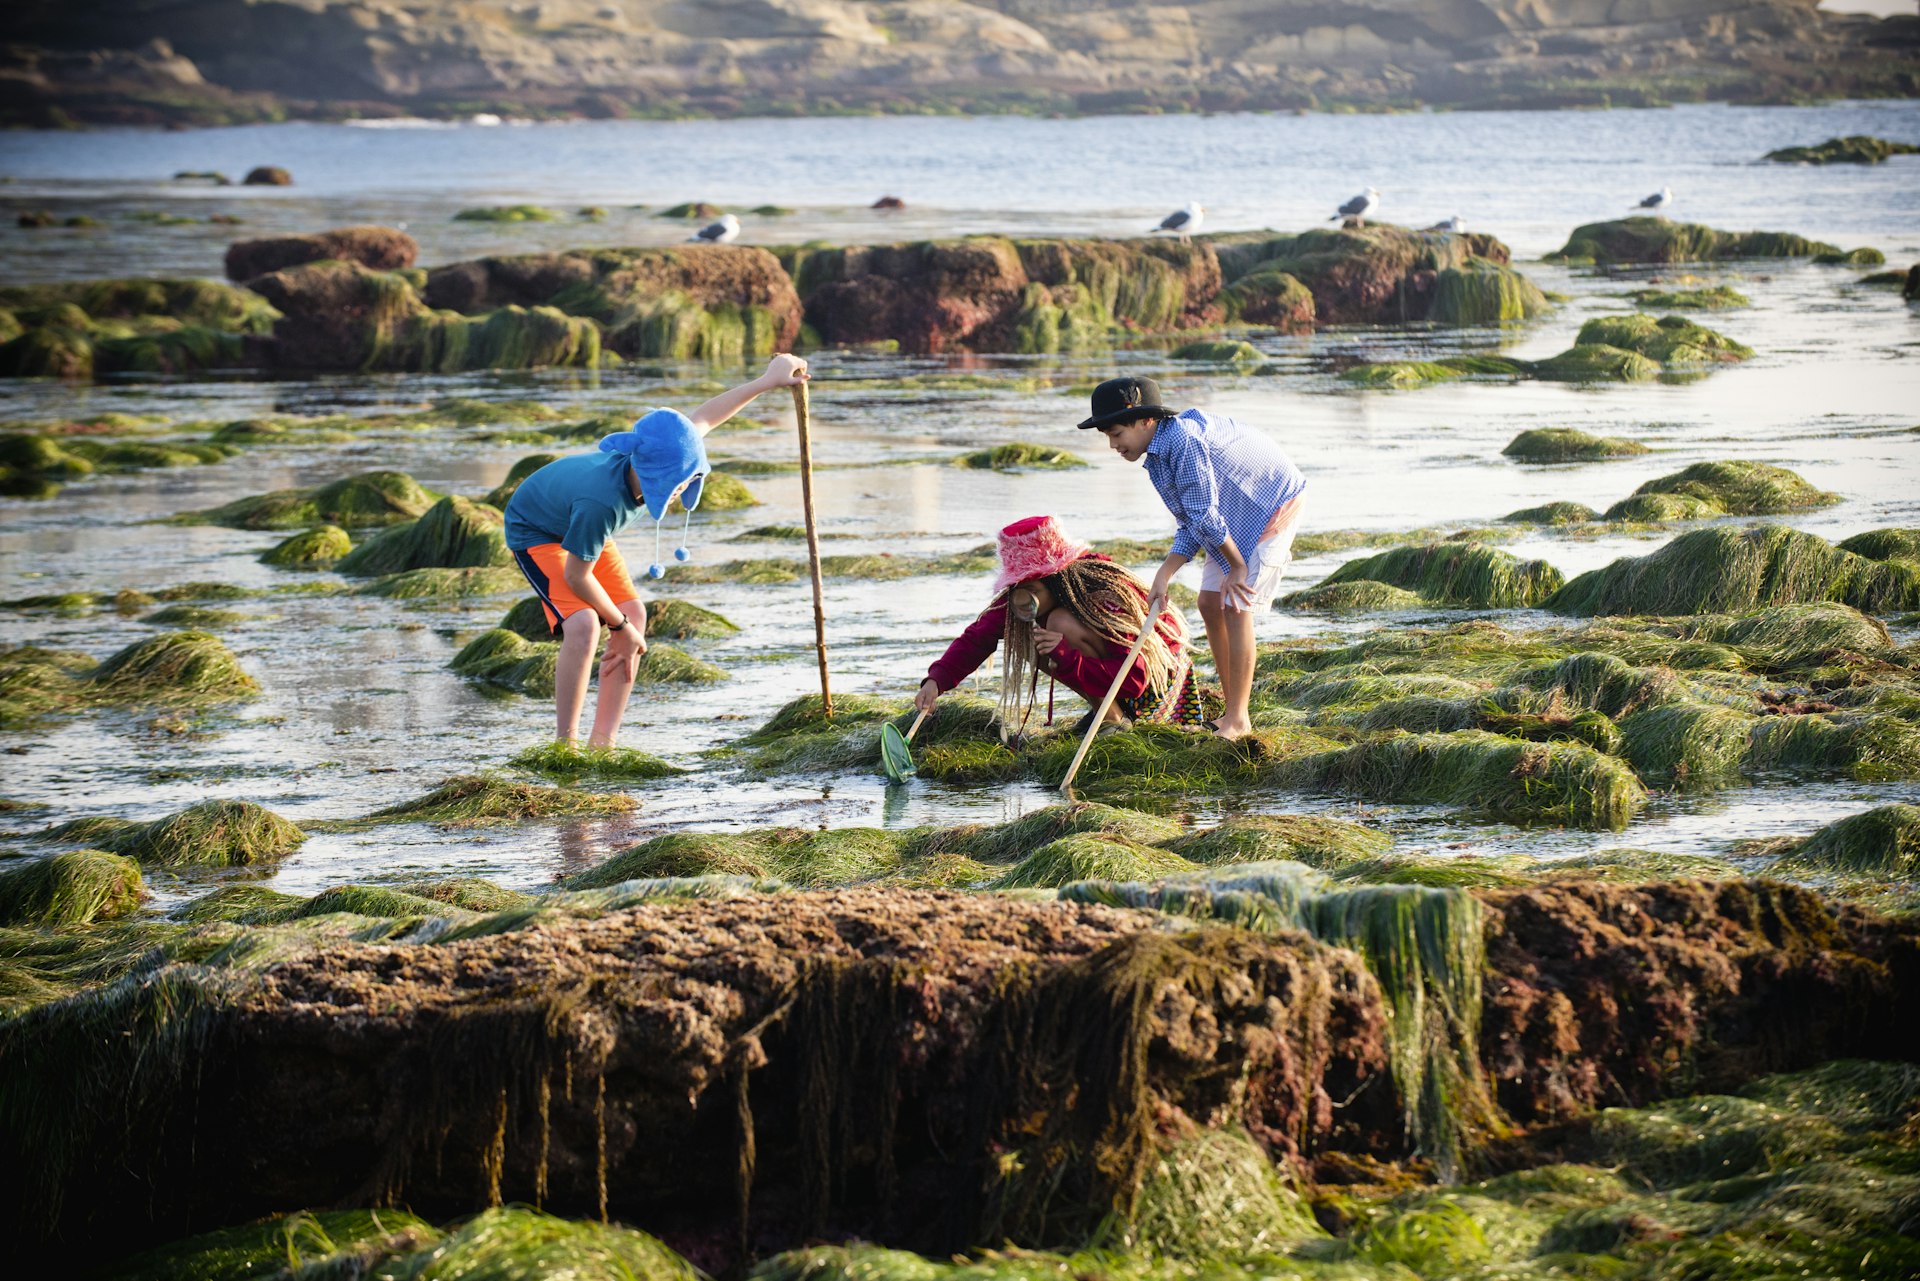 Ethnically diverse children explore tide pools with net and hats